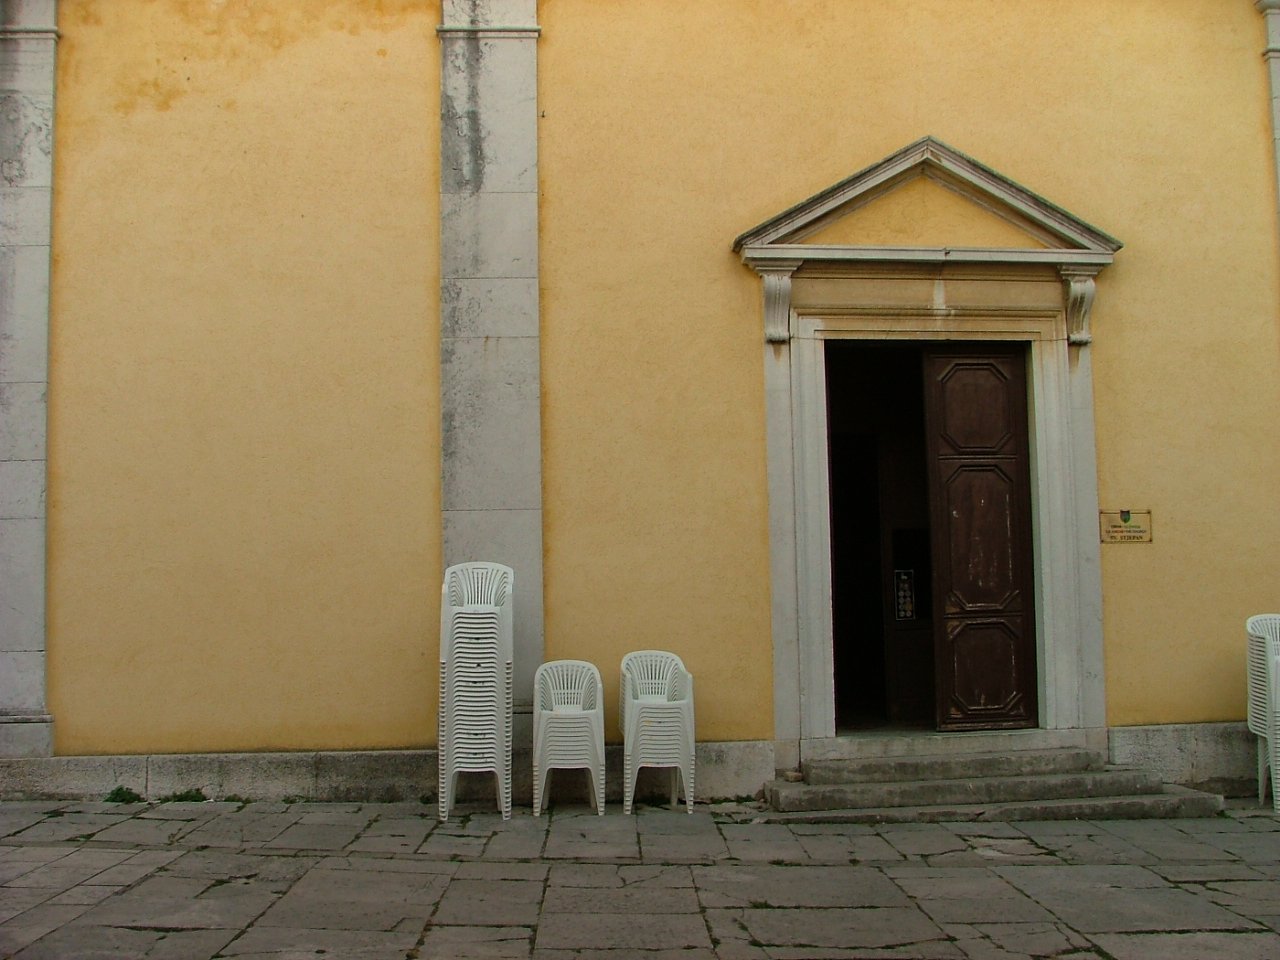 three chairs are sitting outside an empty building